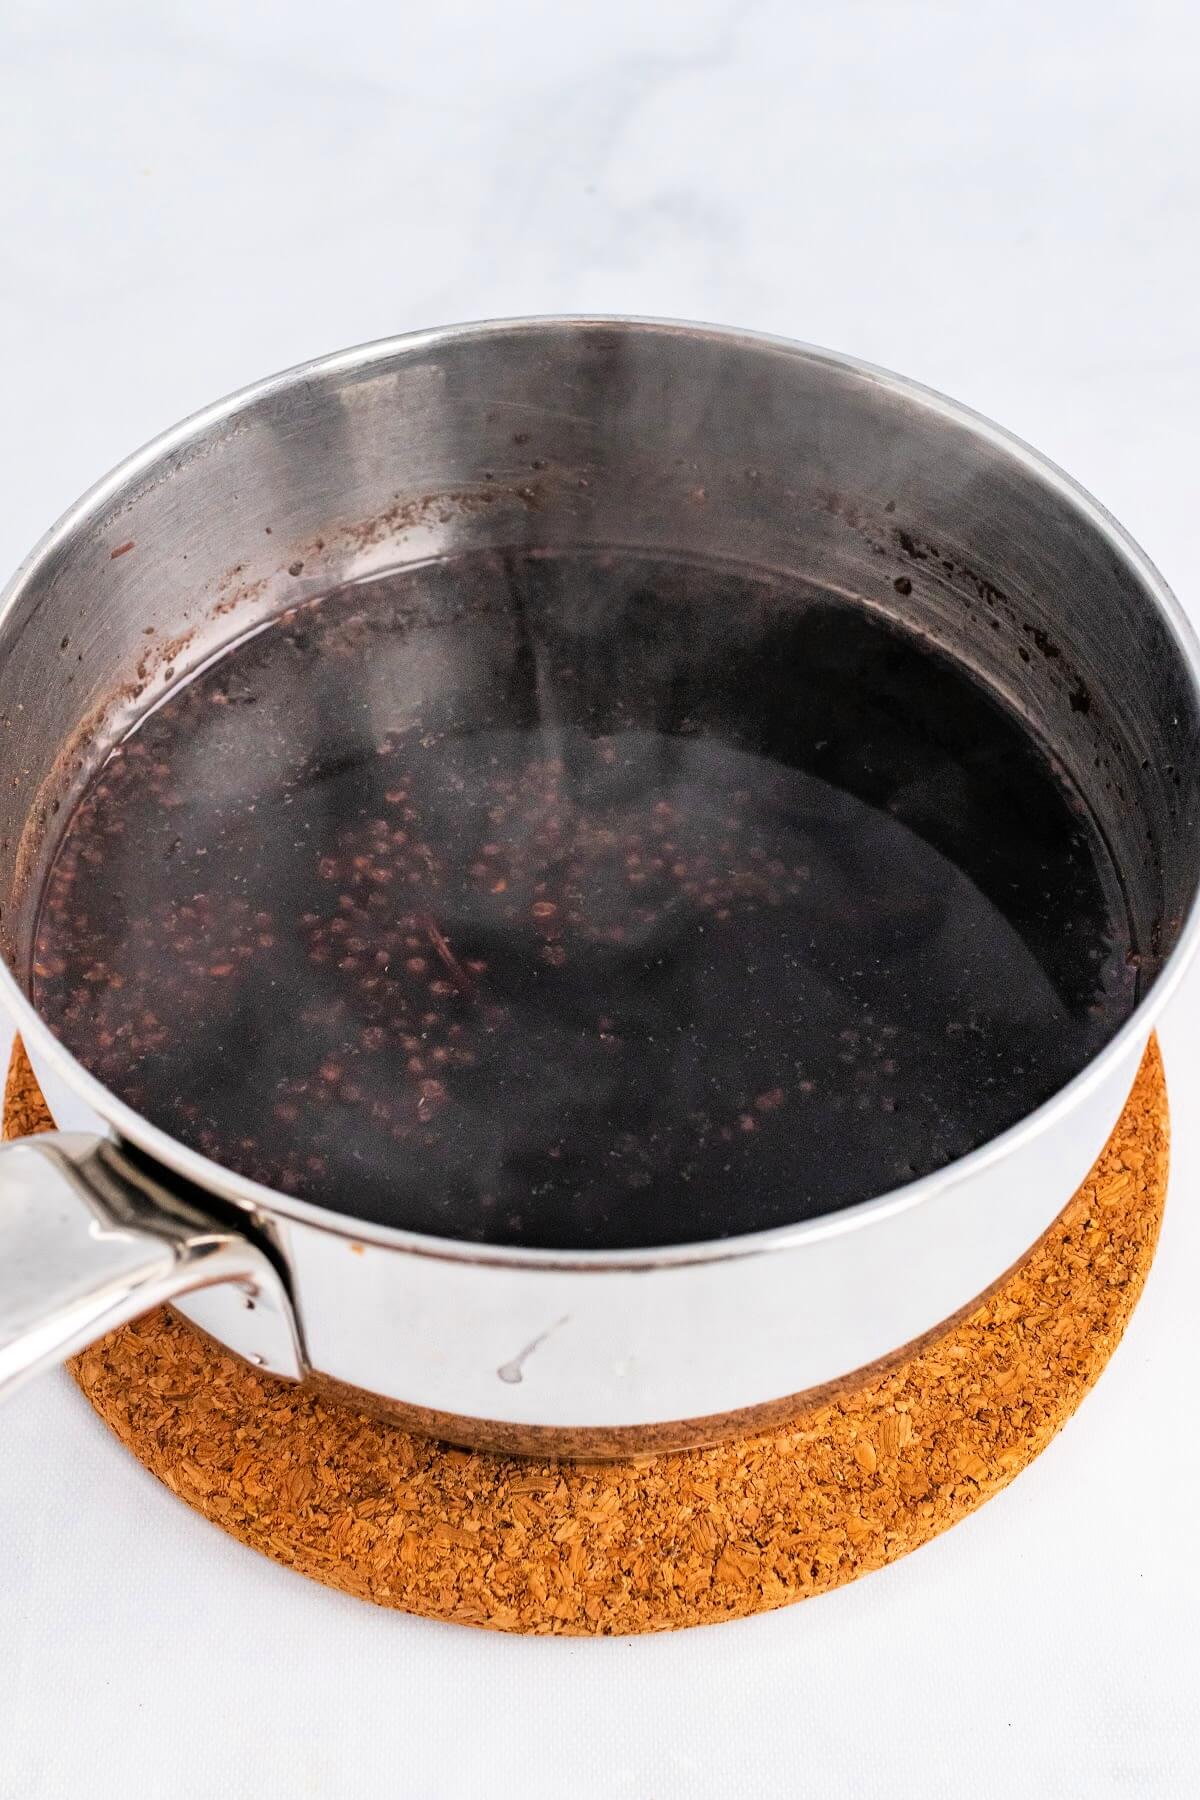 Saucepan filled with a steaming hot dark purple liquid and cooked elderberries floating at the top, sitting on top of a cork trivet.